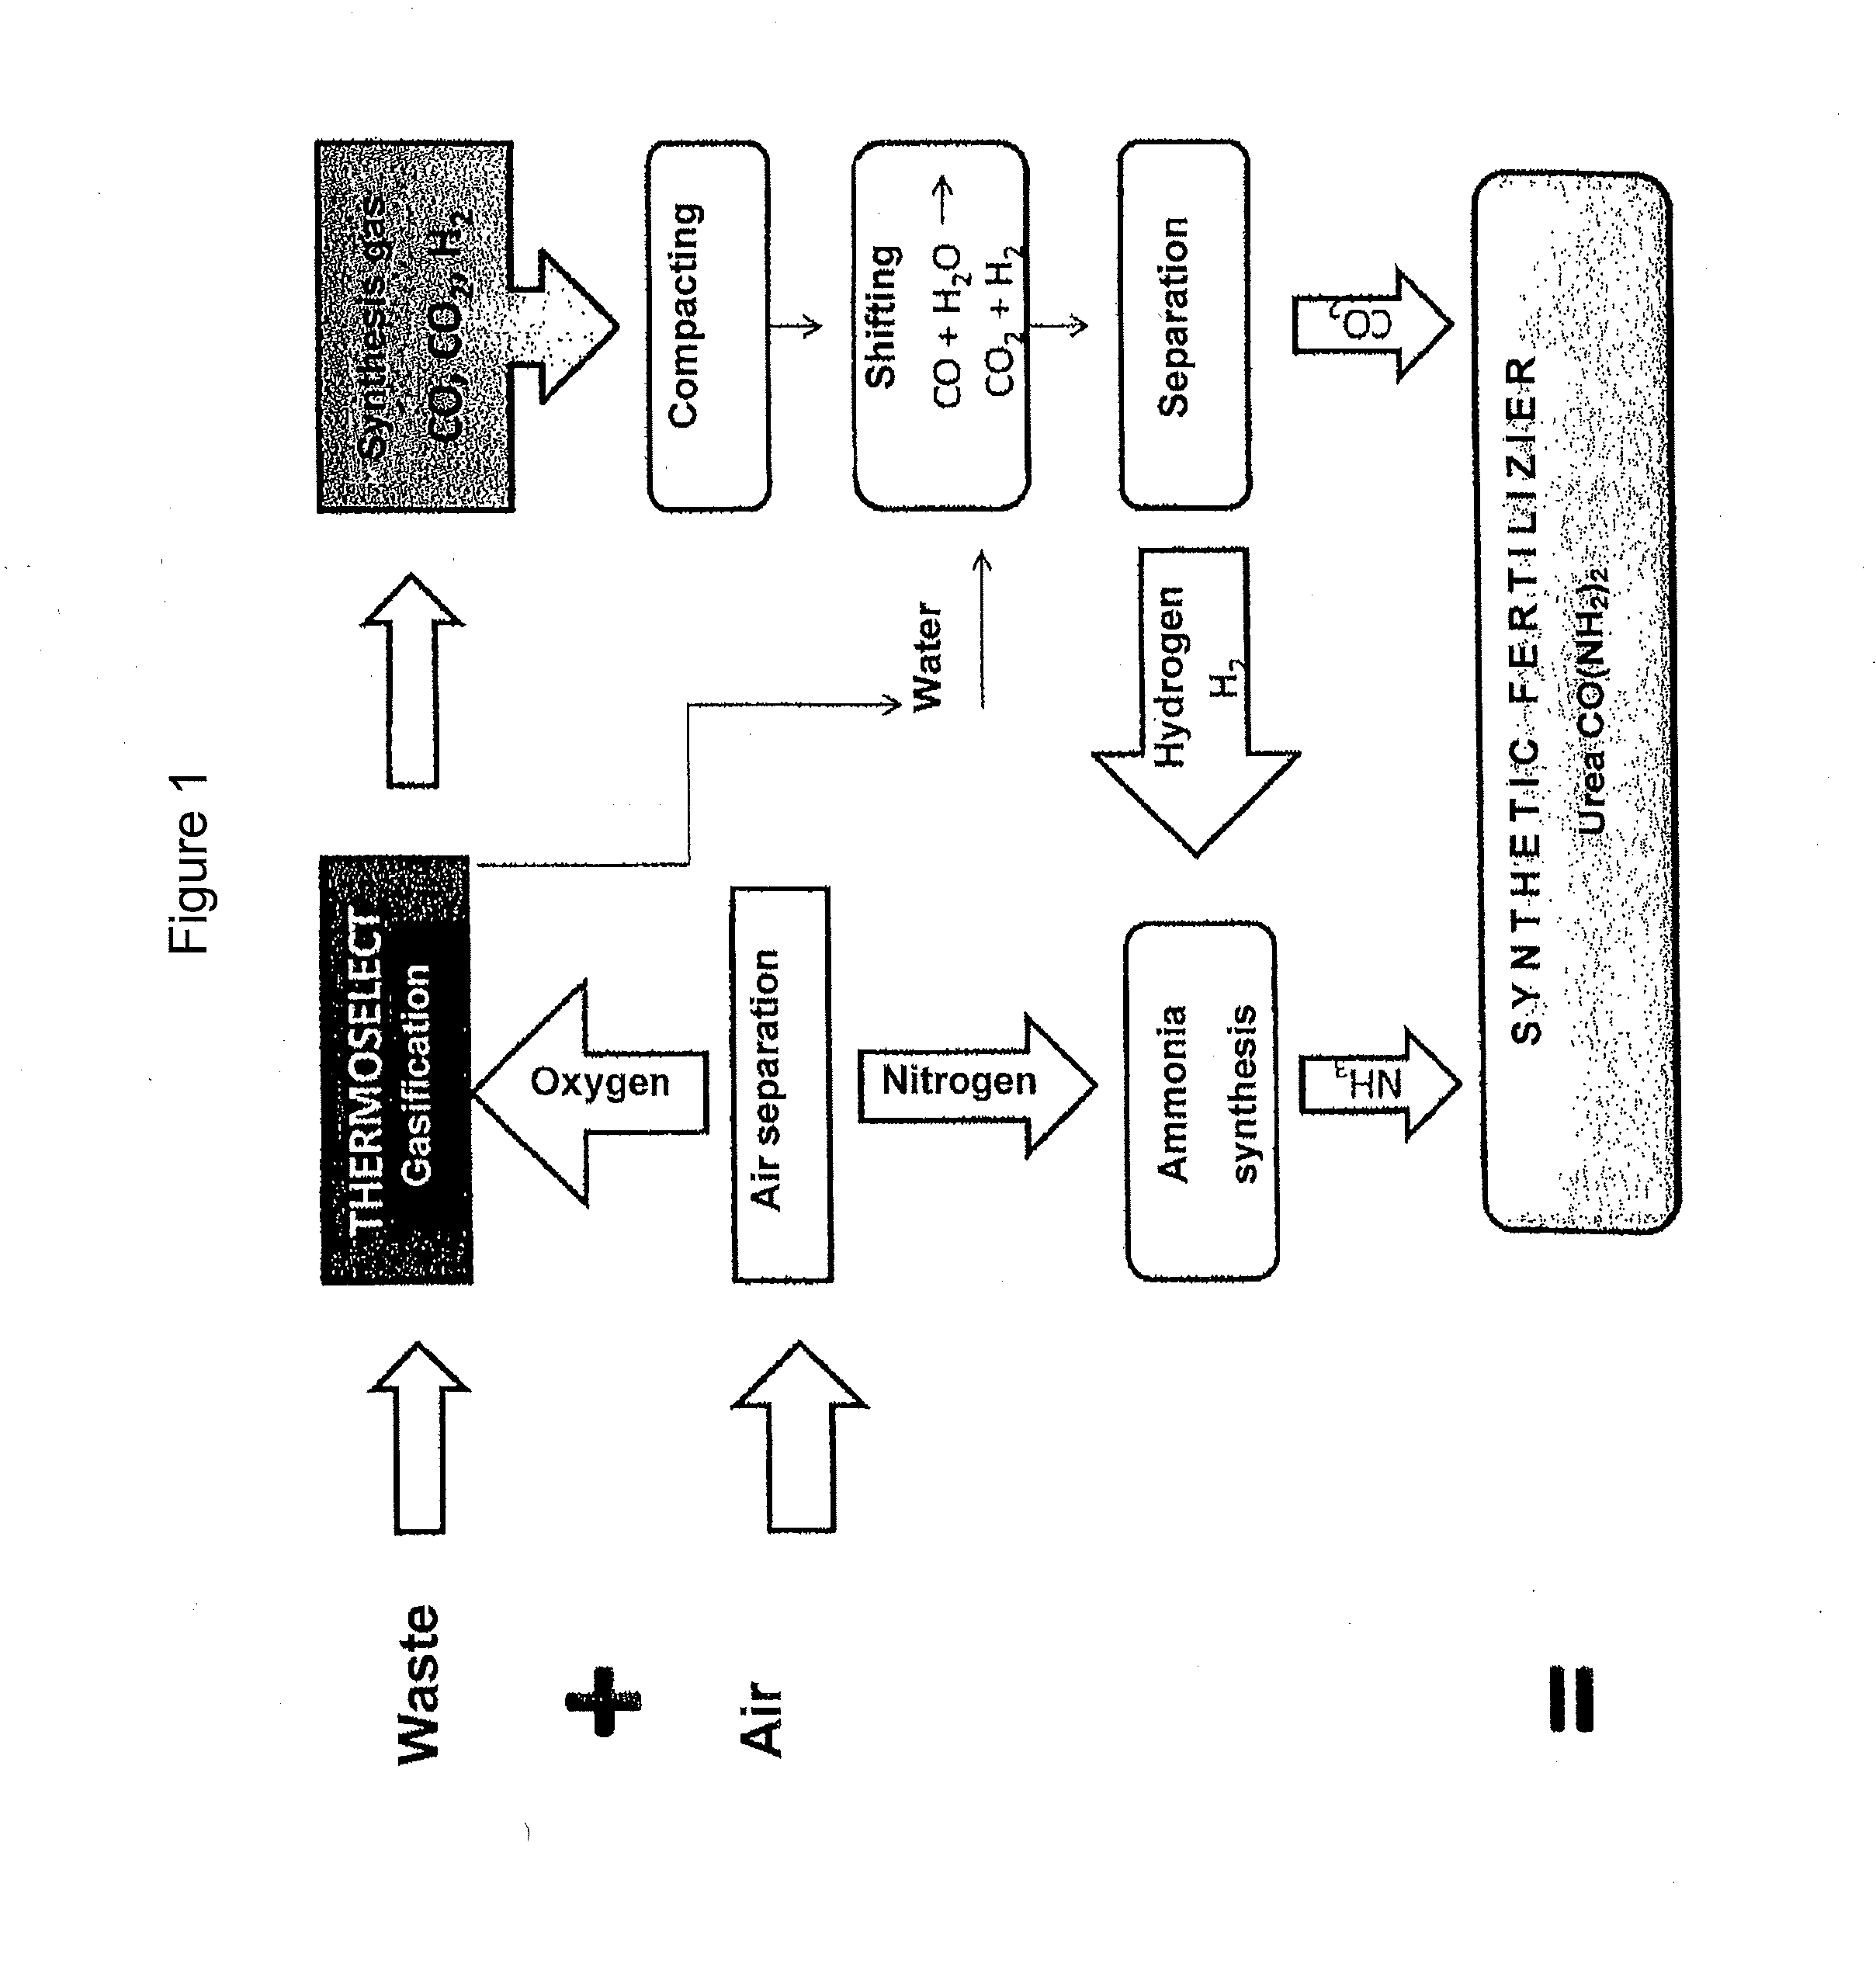 Method of manufacturing urea from refuse, preferably domestic waste, of any composition